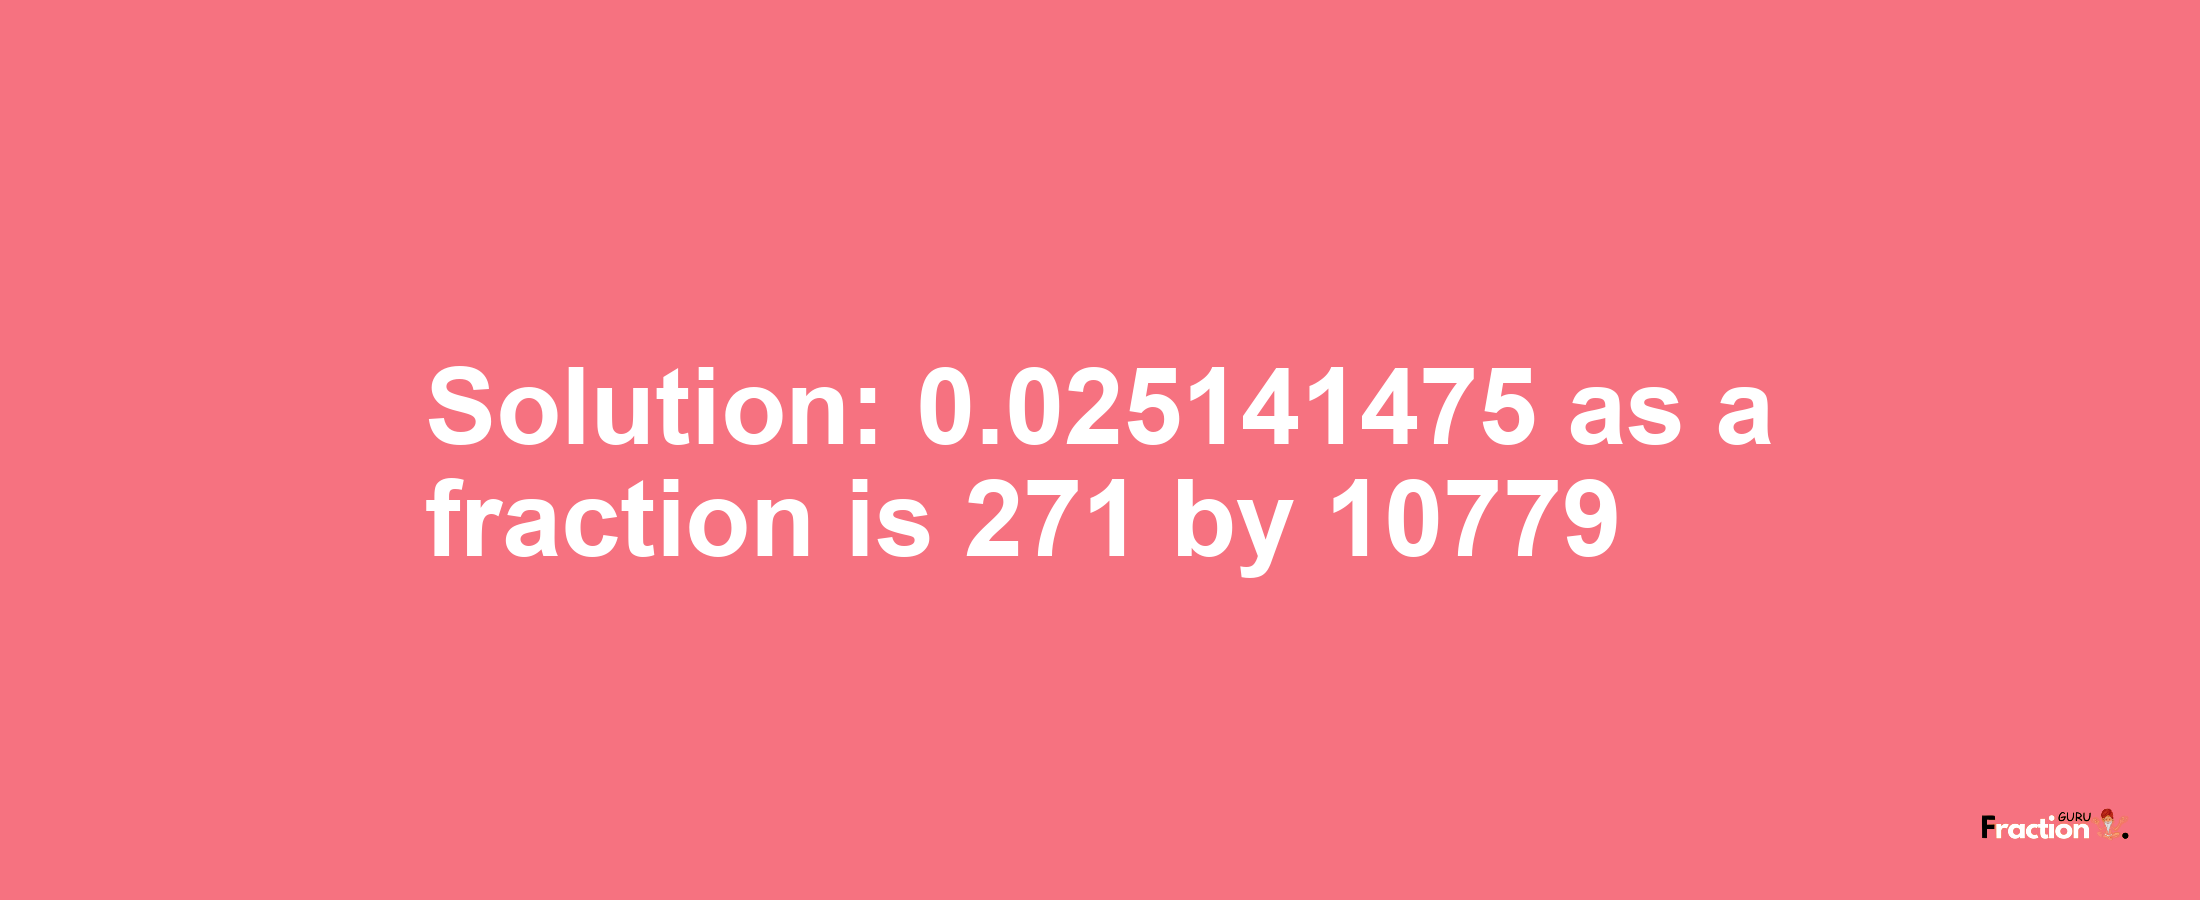 Solution:0.025141475 as a fraction is 271/10779